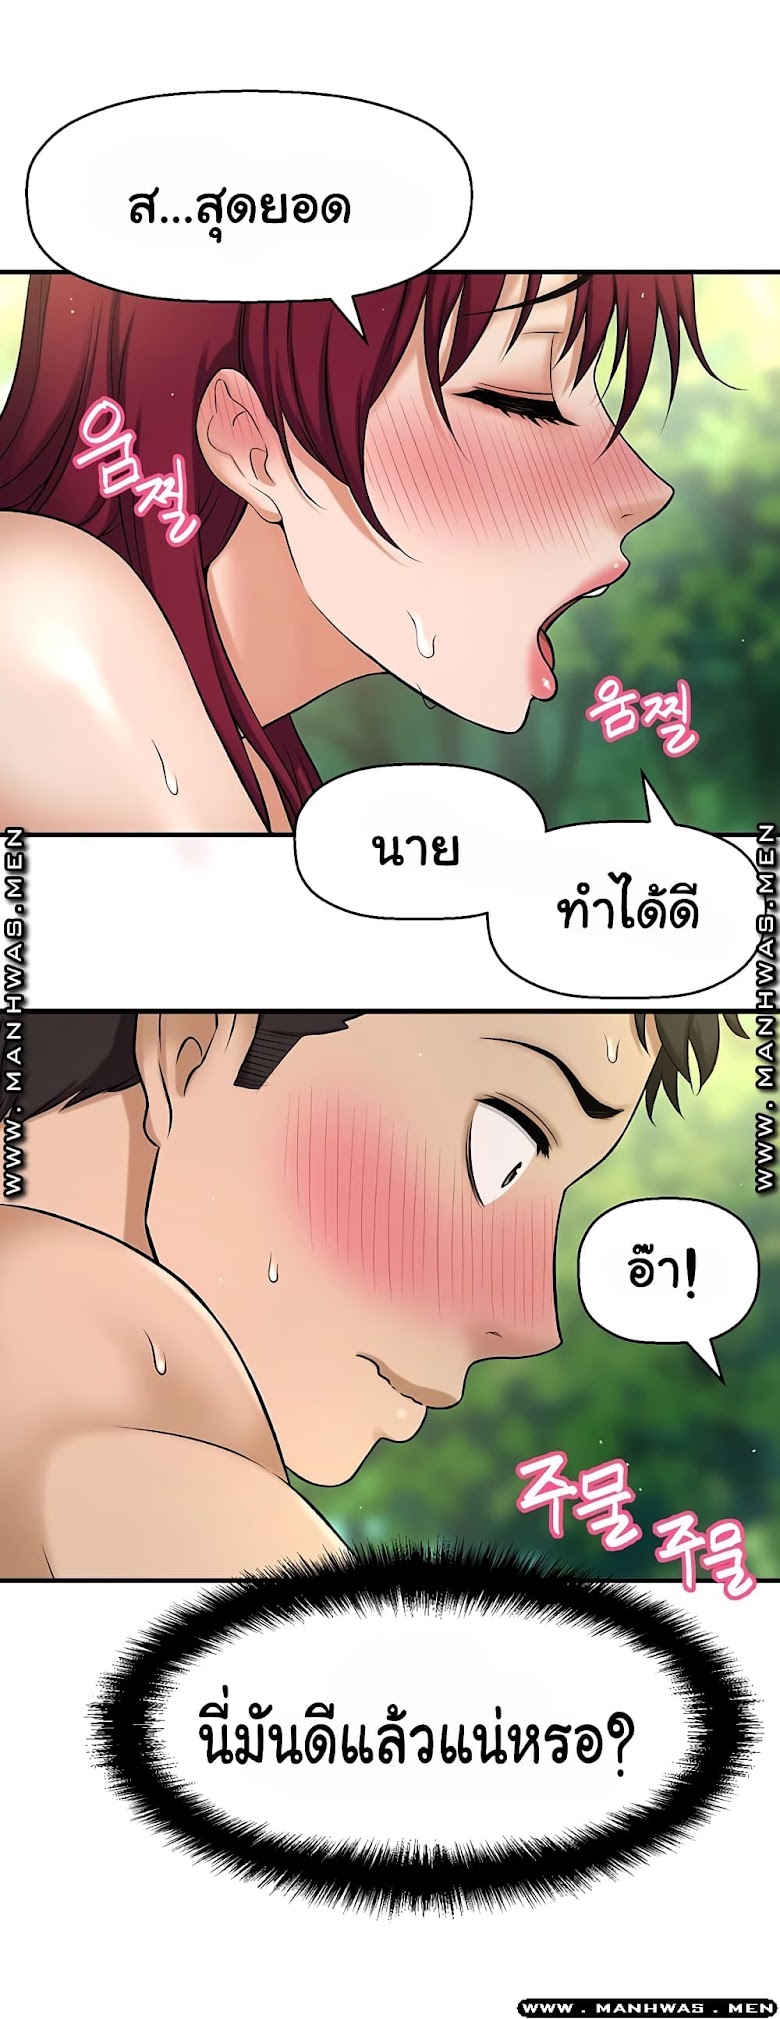 I Want to Know Her - หน้า 3